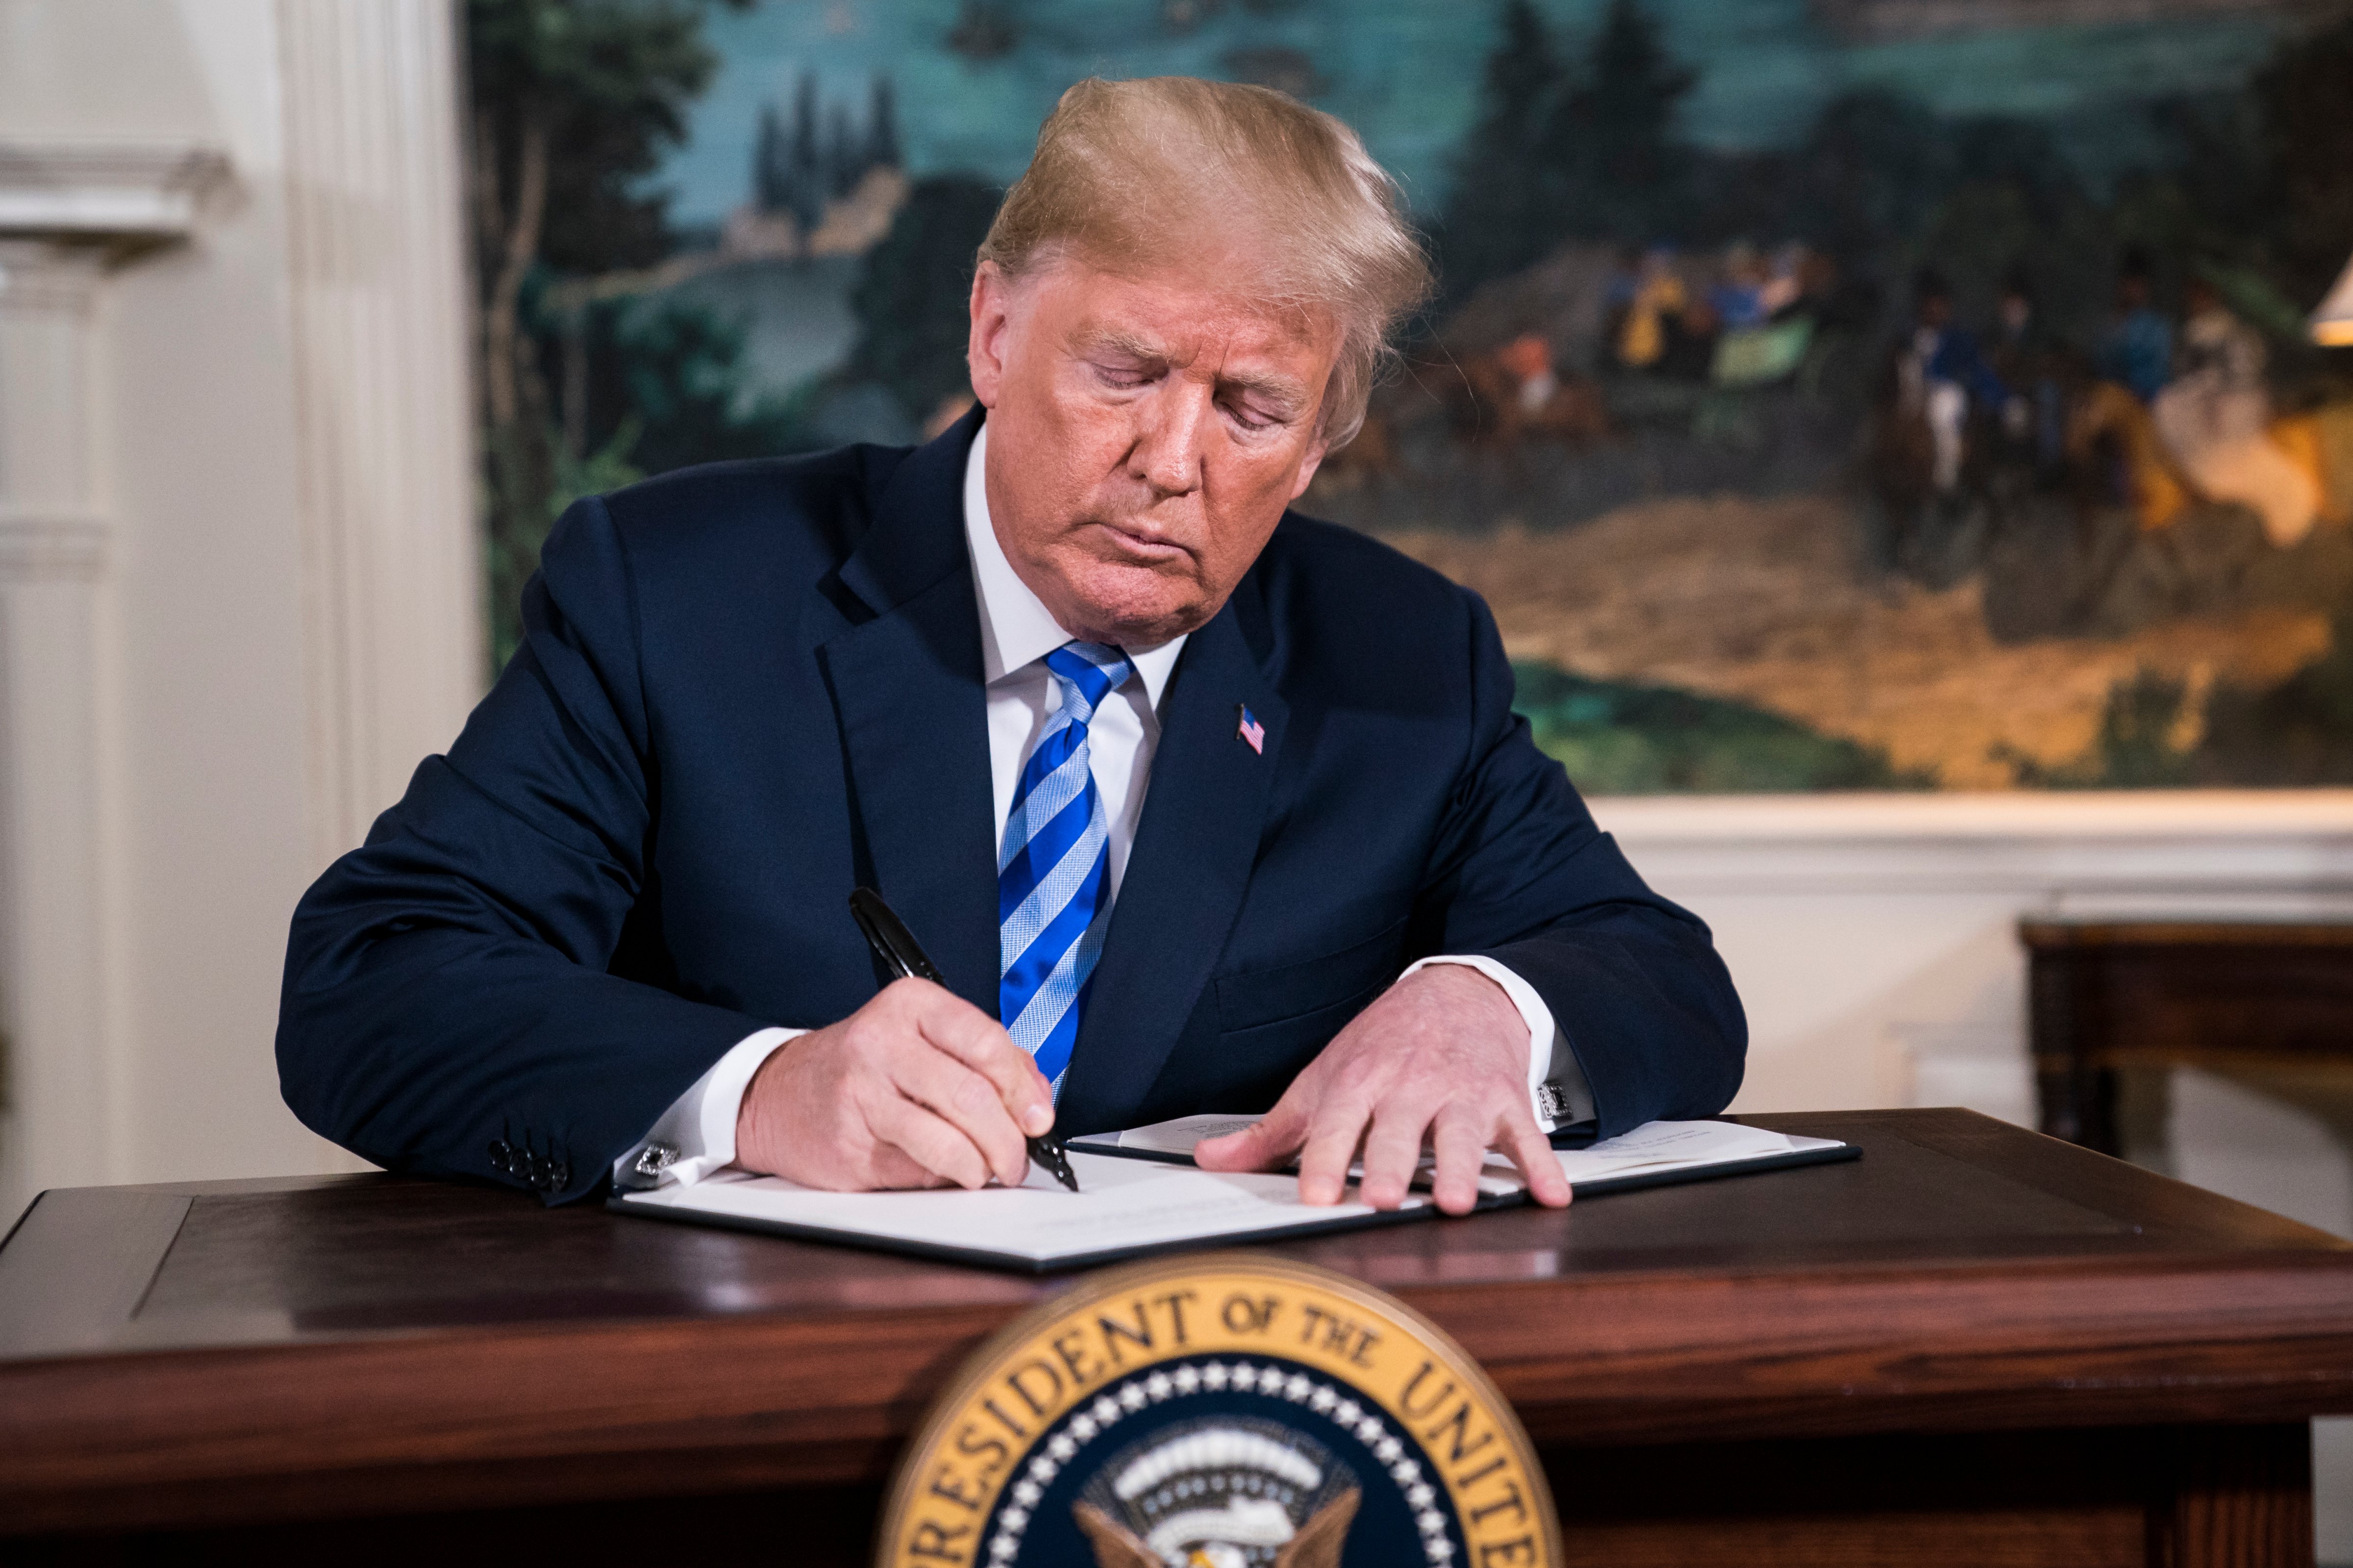 President Donald J. Trump signs a National Security Presidential Memorandum as he announces the withdrawal of the United States from the Iran nuclear deal on May 8, 2018. (The Washington Post—The Washington Post/Getty Images)